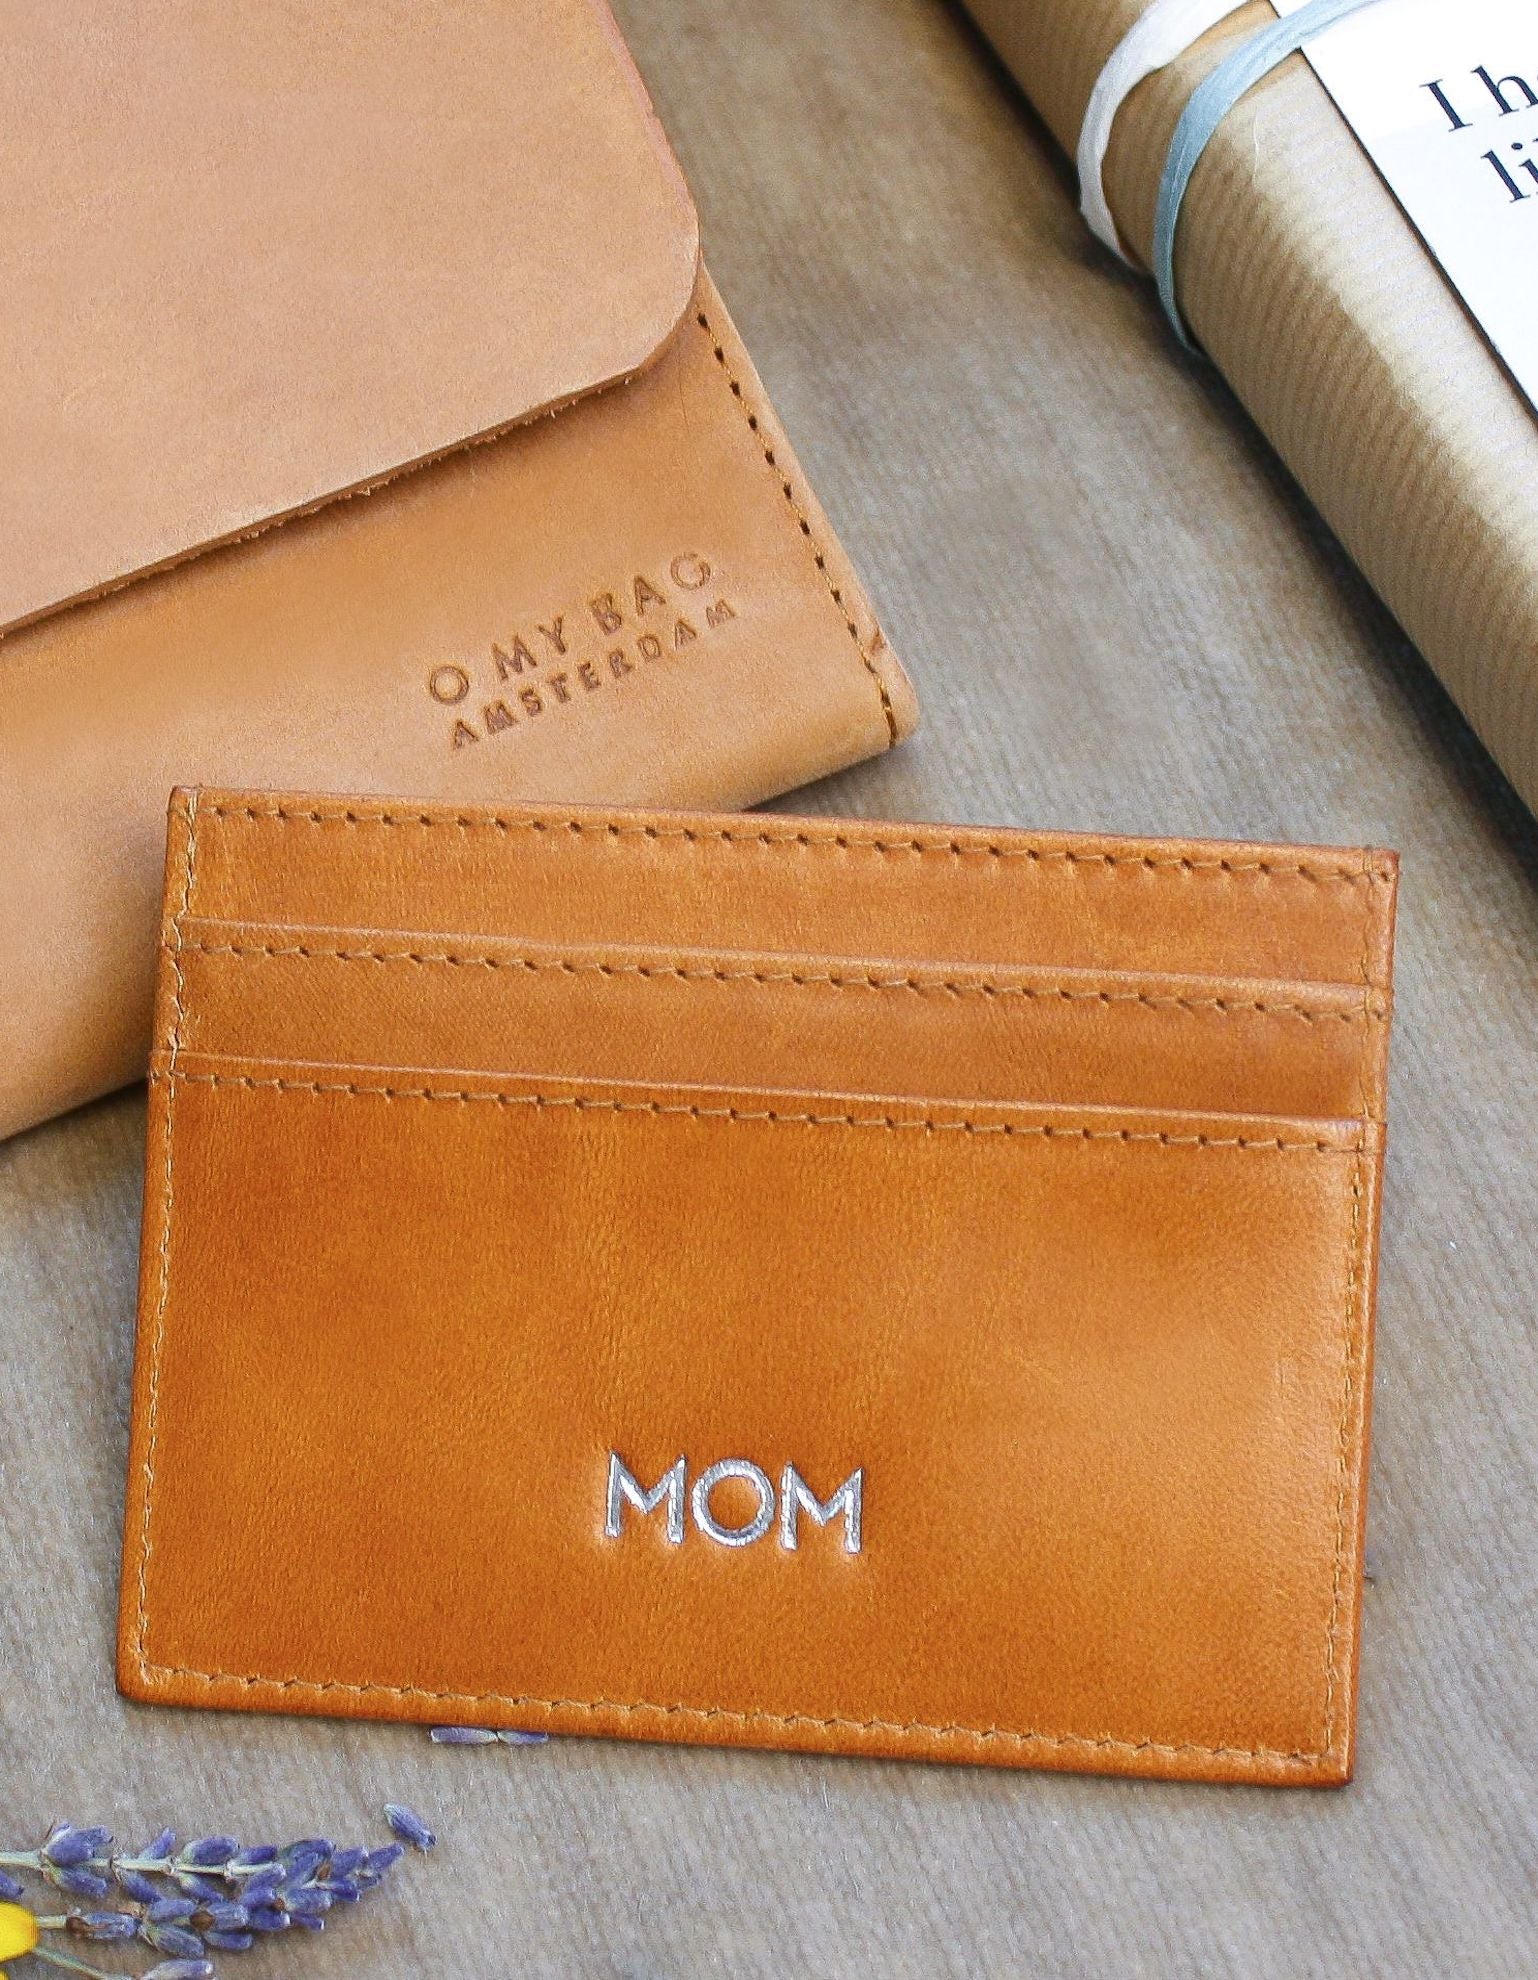 Marks Cardcase Cognac Classic Leather. Square leather wallet, card case for bank cards. Monogram image.